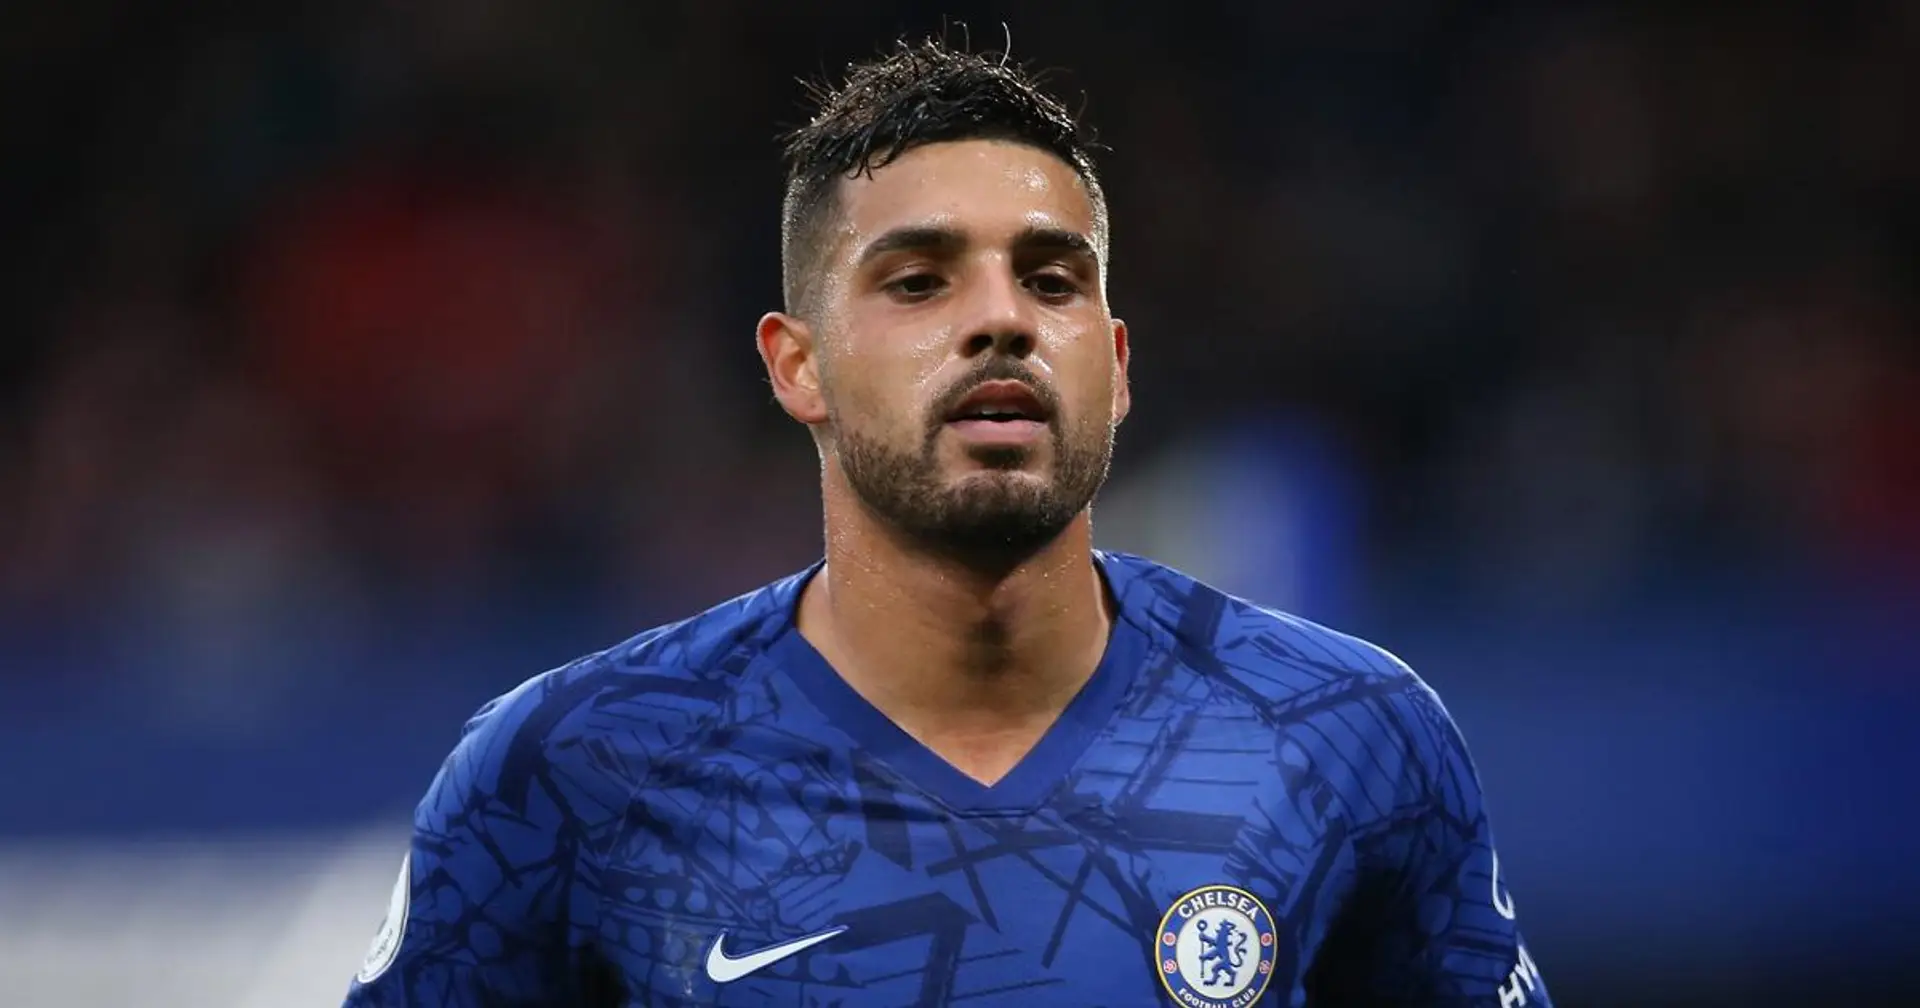 Inter will not pay Chelsea's asking price for Emerson: Fabrizio Romano